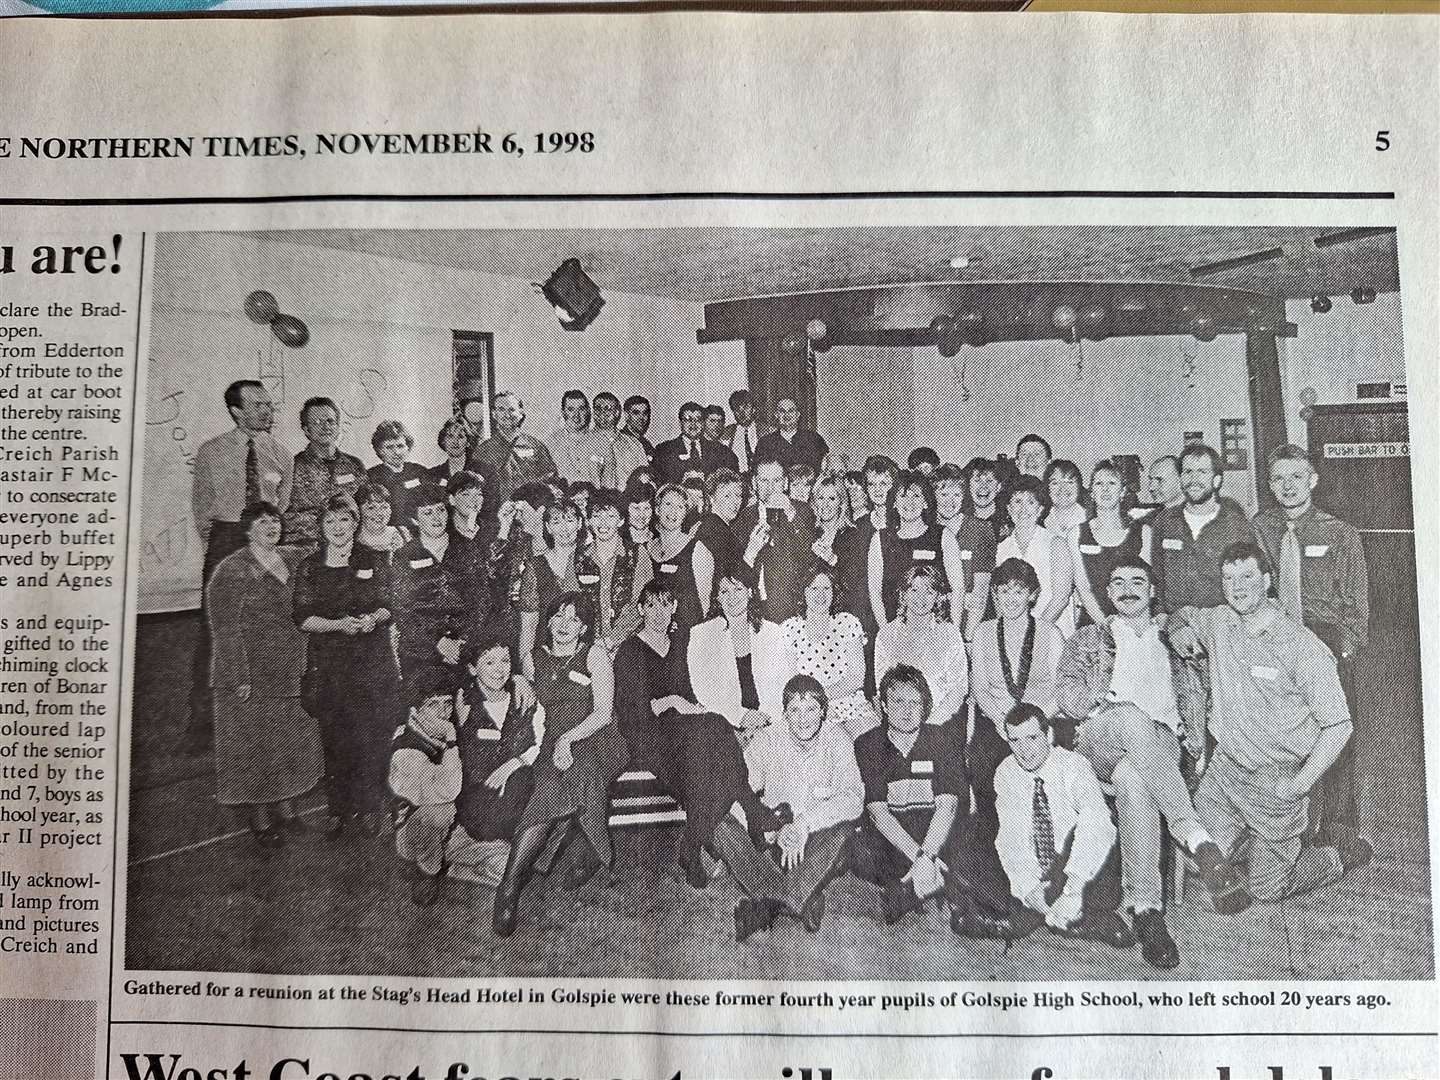 From the edition of November 6, 1998. The caption reads: "Gathered for a reunion at the Stag's Head Hotel in Golspie were these former fourth year pupils of Golspie High School, who left school 20 years ago."